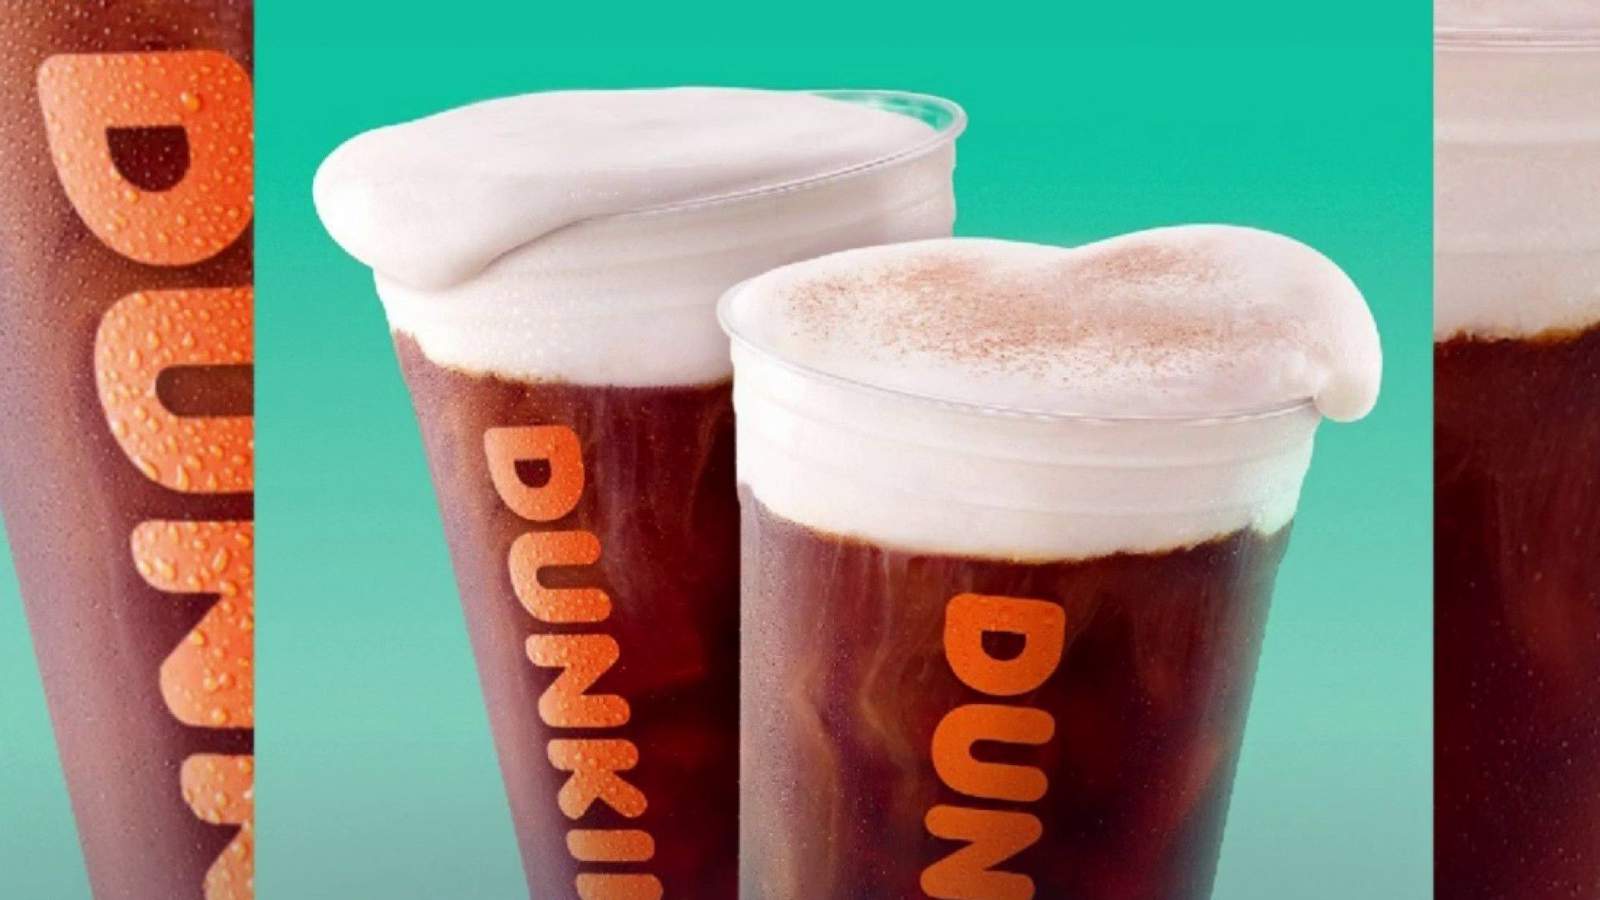 Tried Dunkin’s new Sweet Foam Cold Brew? Here are our thoughts